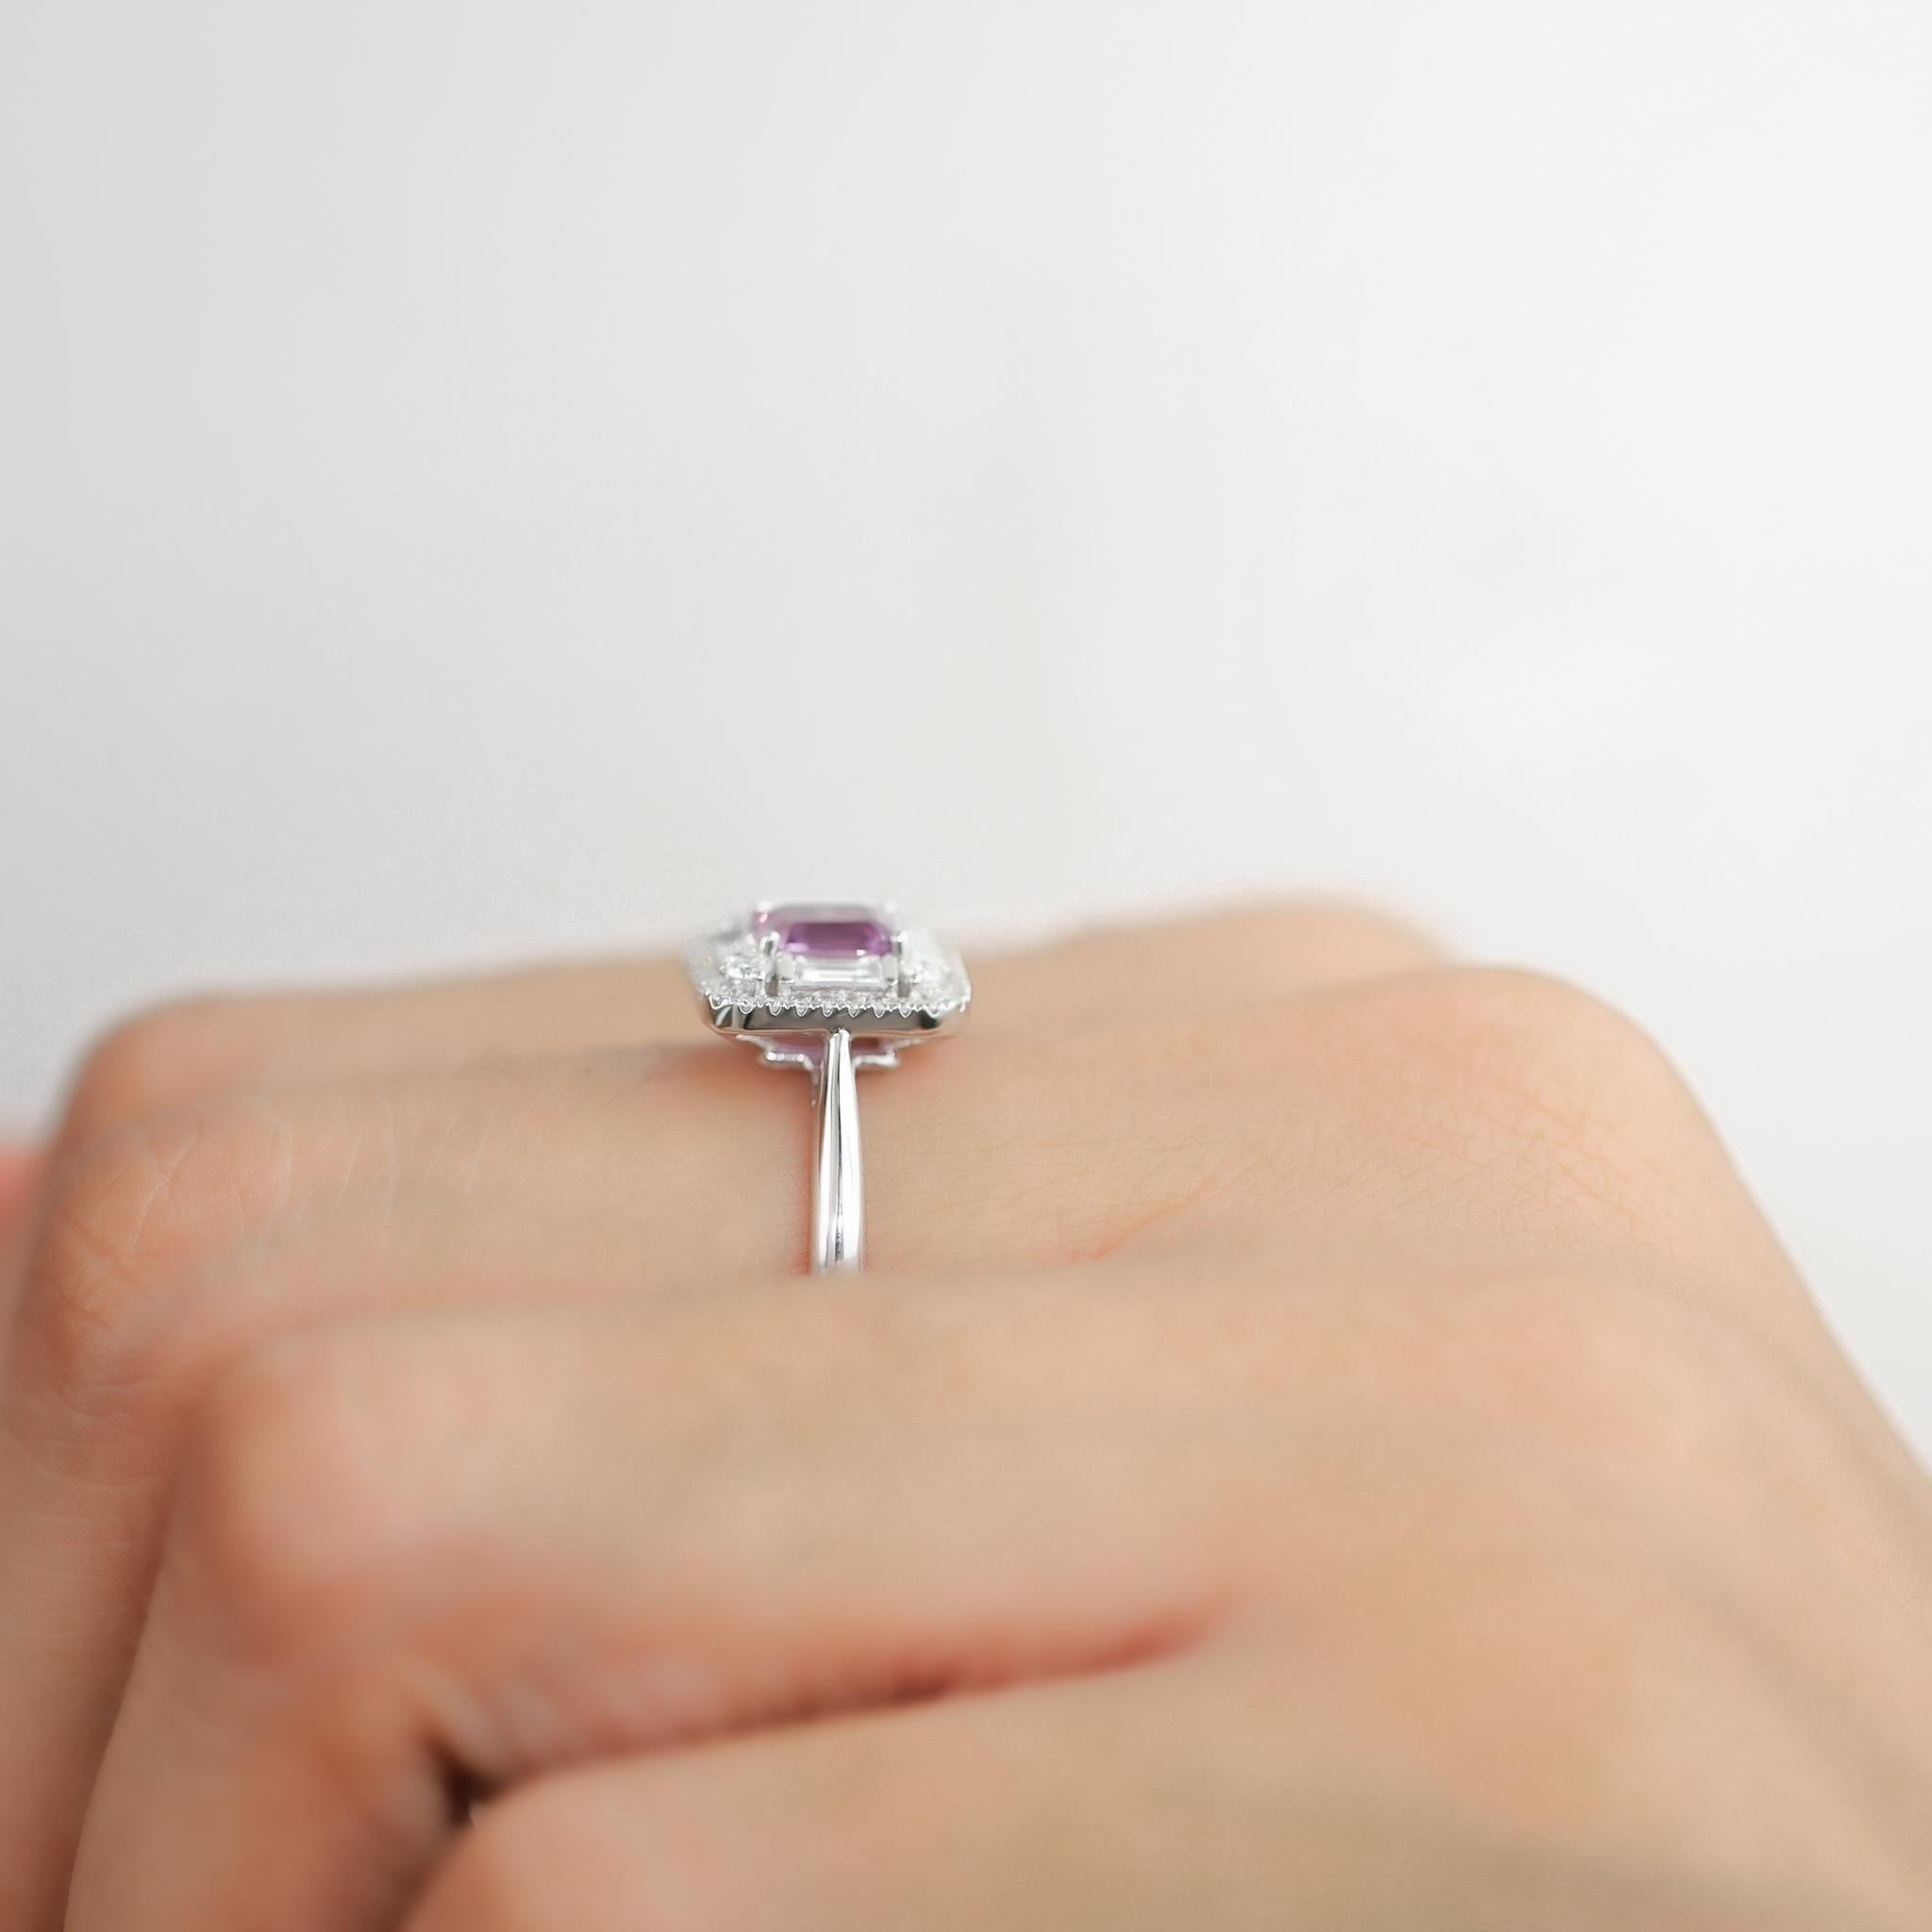 1 Carat Pink Sapphire Diamond Cocktail Engagement Ring in 18k White Gold For Sale 1